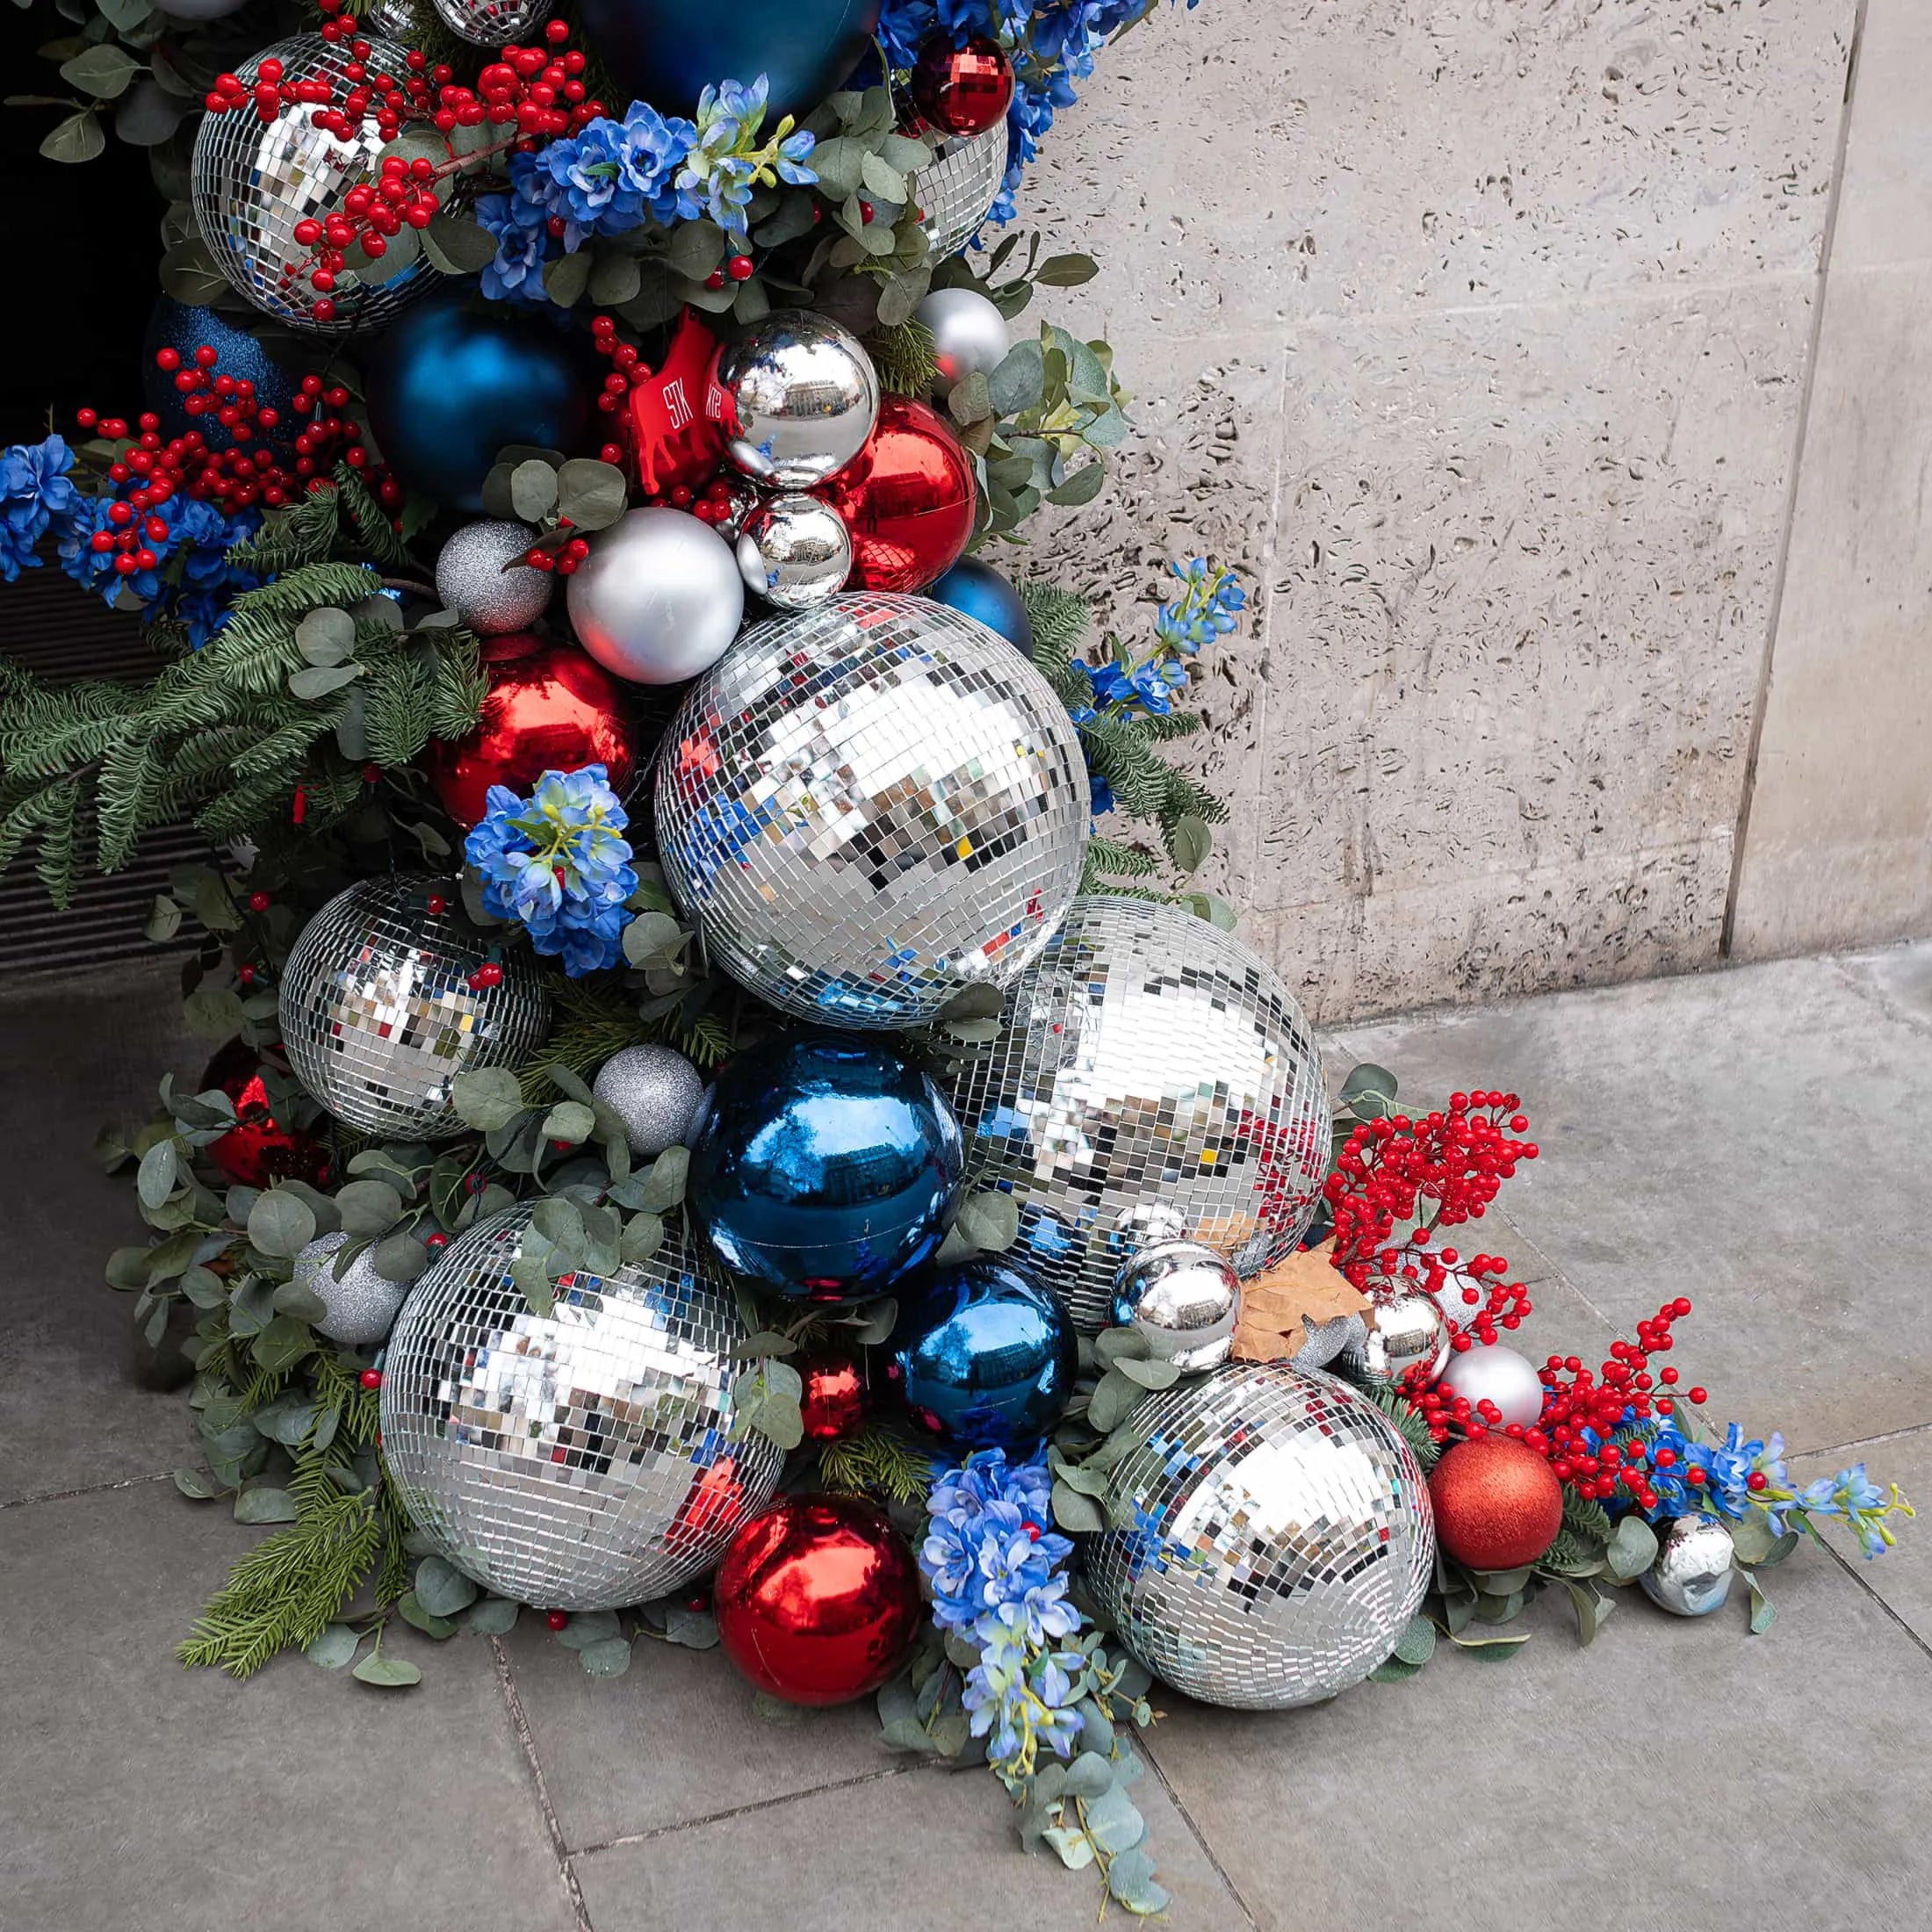 Close-up of a Christmas decoration at STK Steakhouse featuring a cluster of mirror disco balls, red and blue baubles, interspersed with blue hydrangea flowers and red holly berries amidst evergreen foliage.